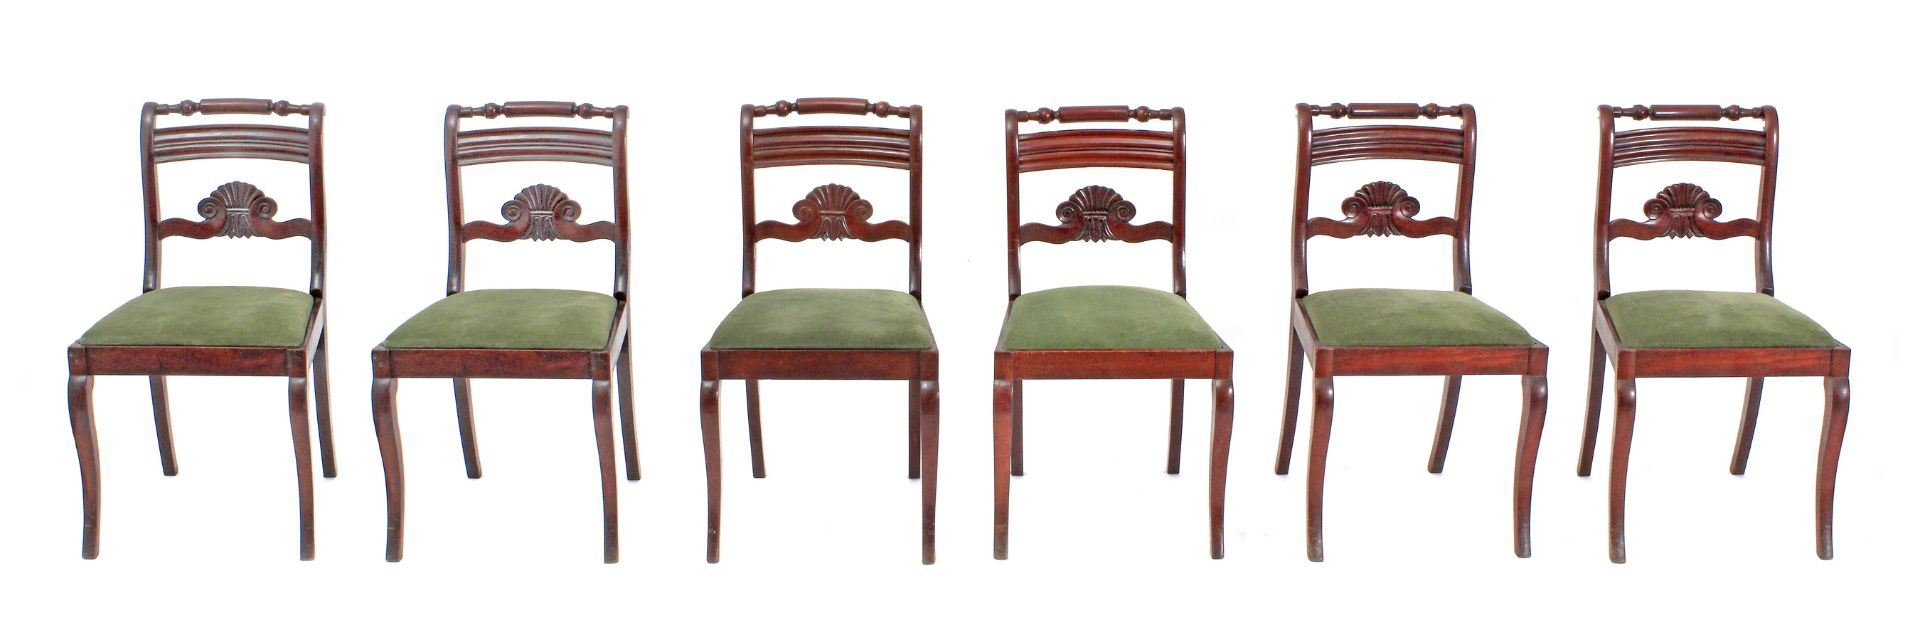 Set of six Regency style mahogany chairs with a green velvet upholstery